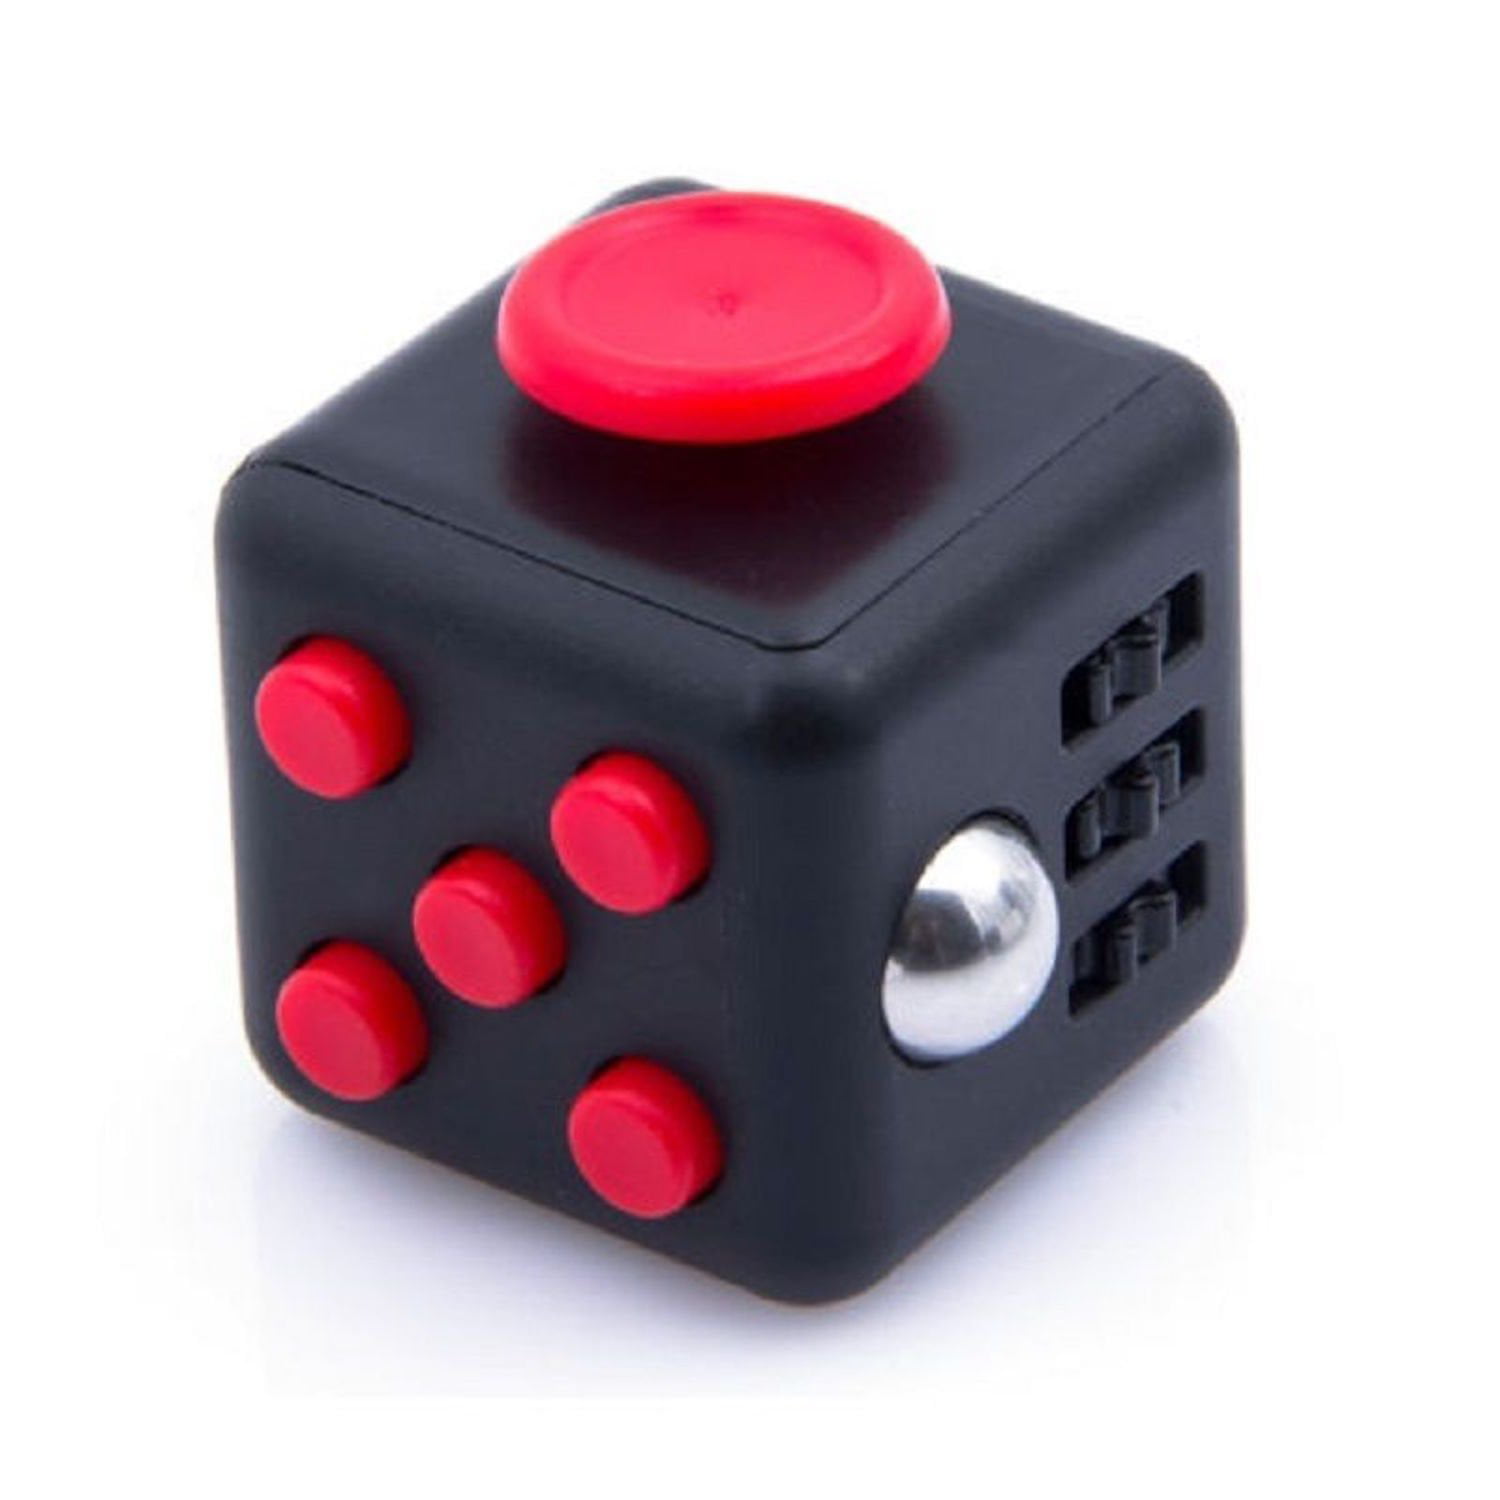 12 Sided Fidget Cube Desk Stress Adults Kids Relief Focus Puzzle Toy Xmas Gift 